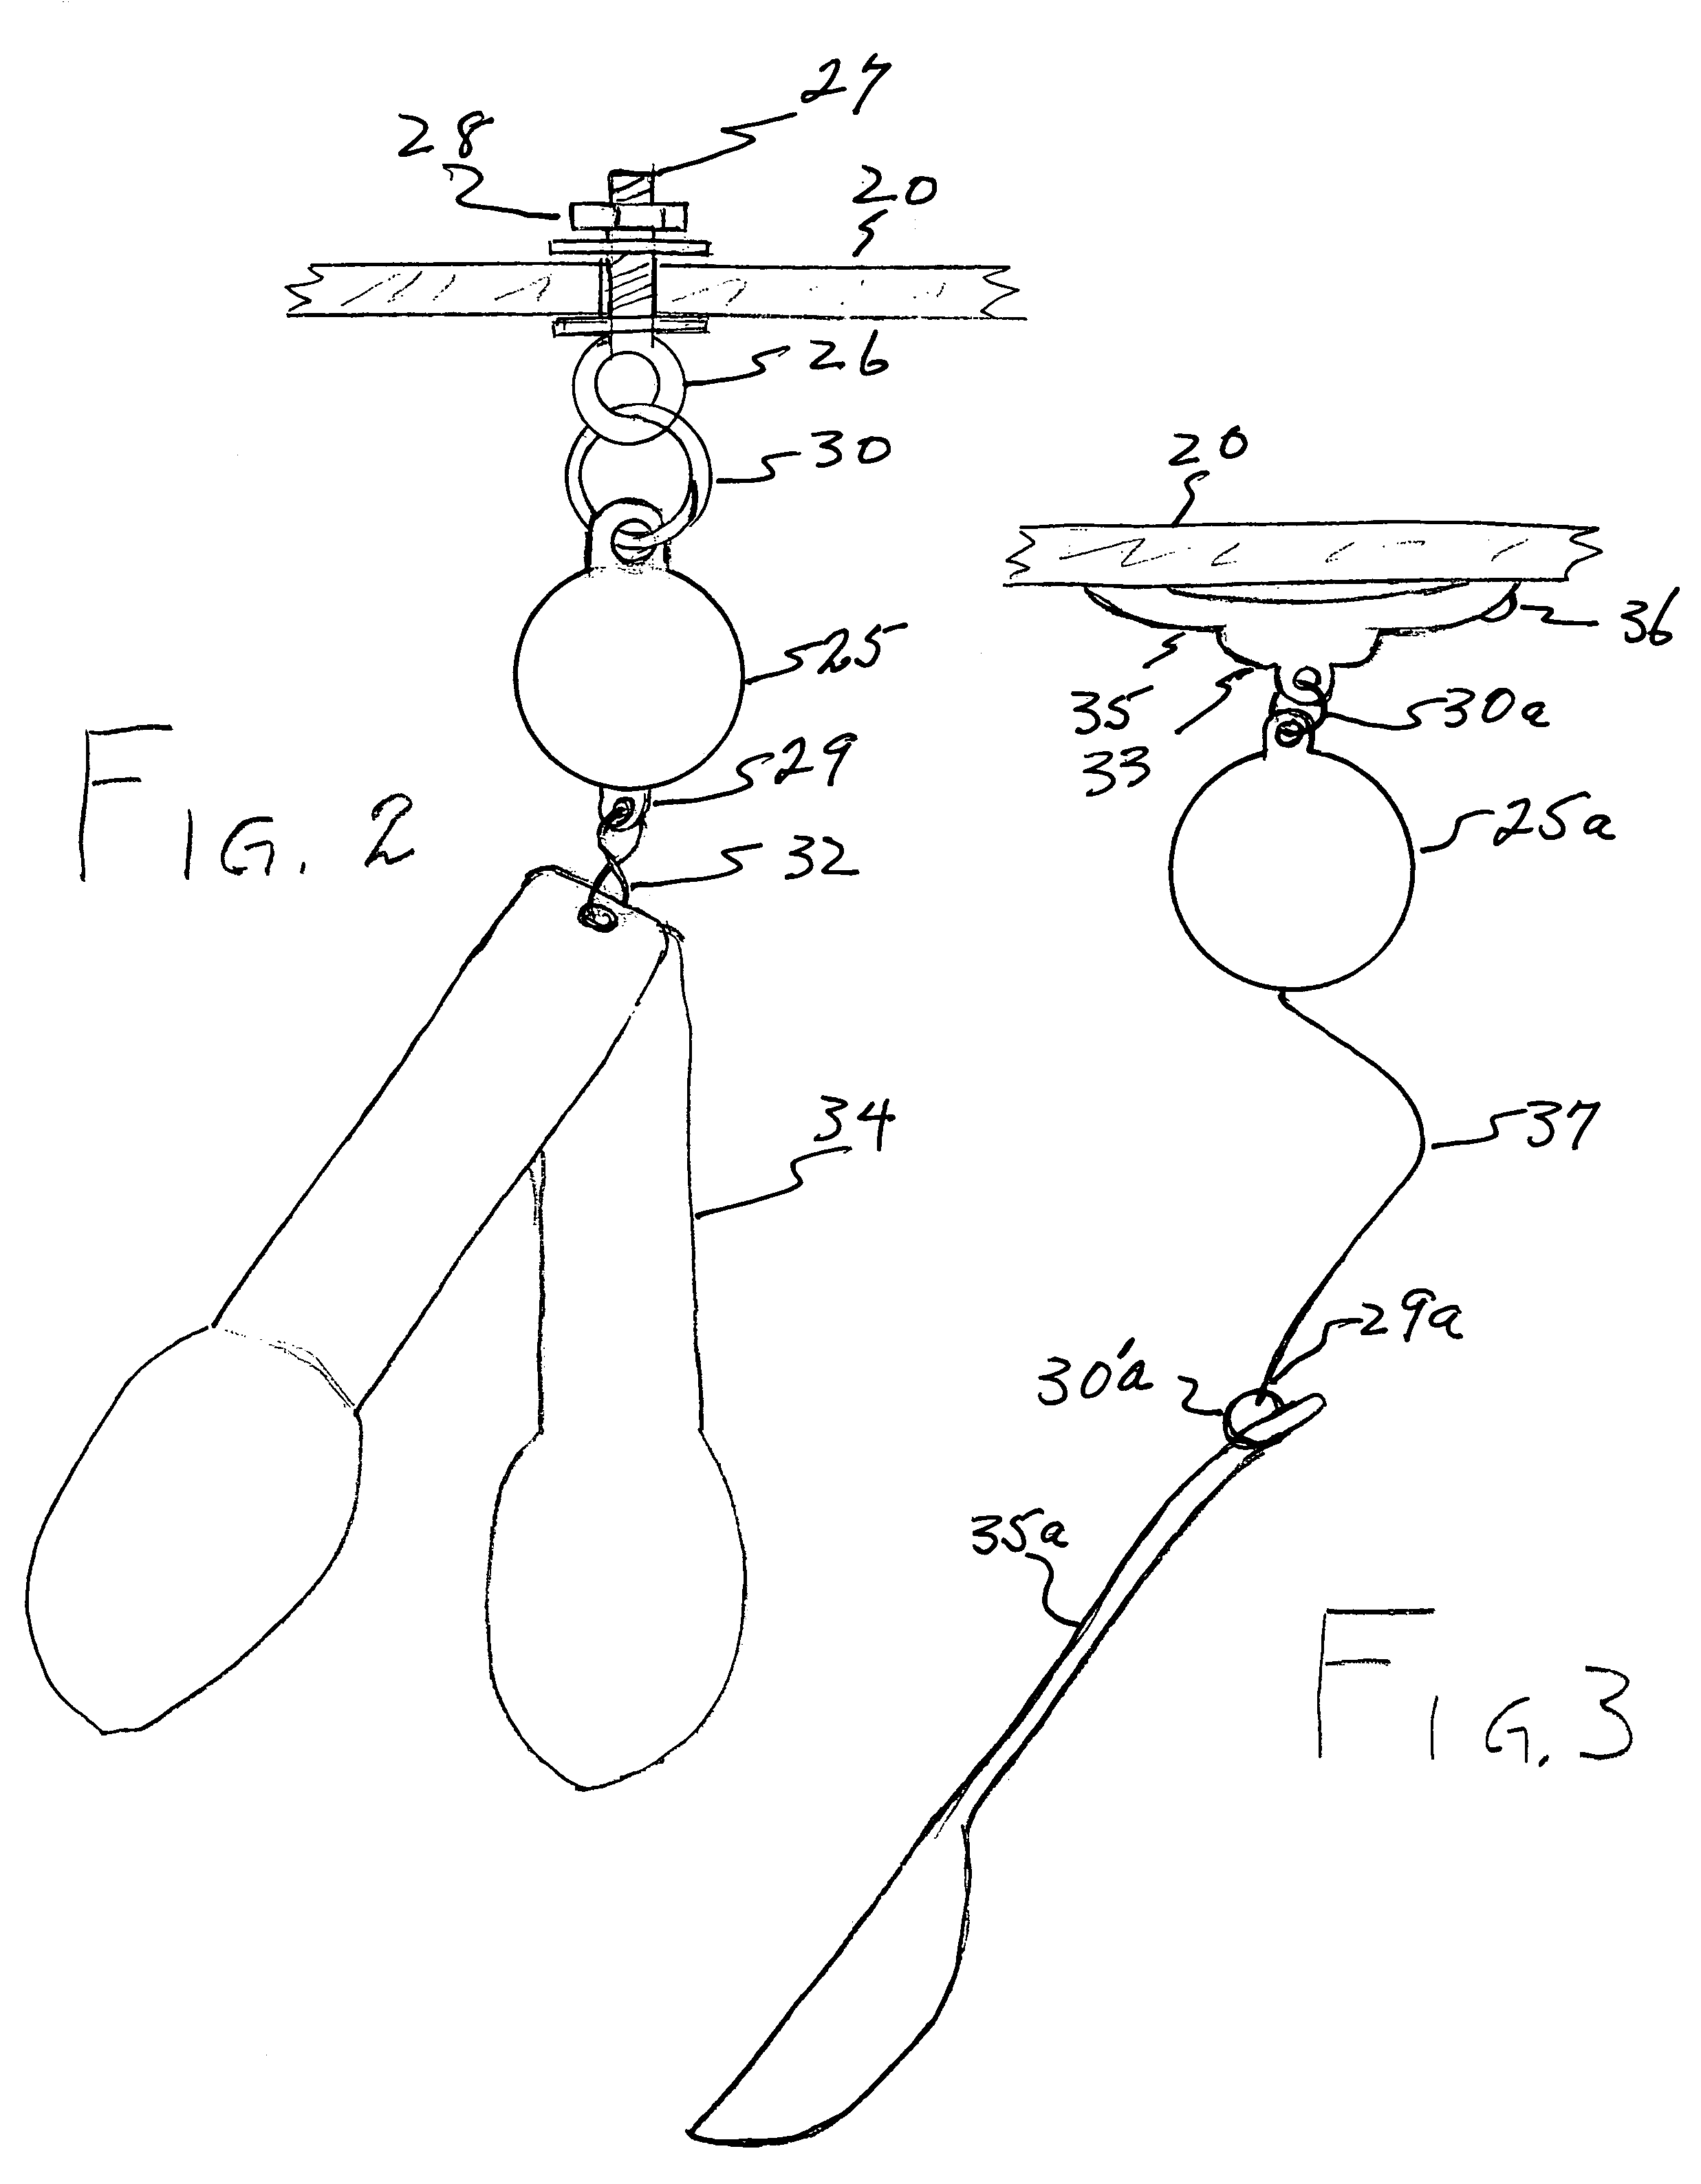 Serving utensil on retractable tether